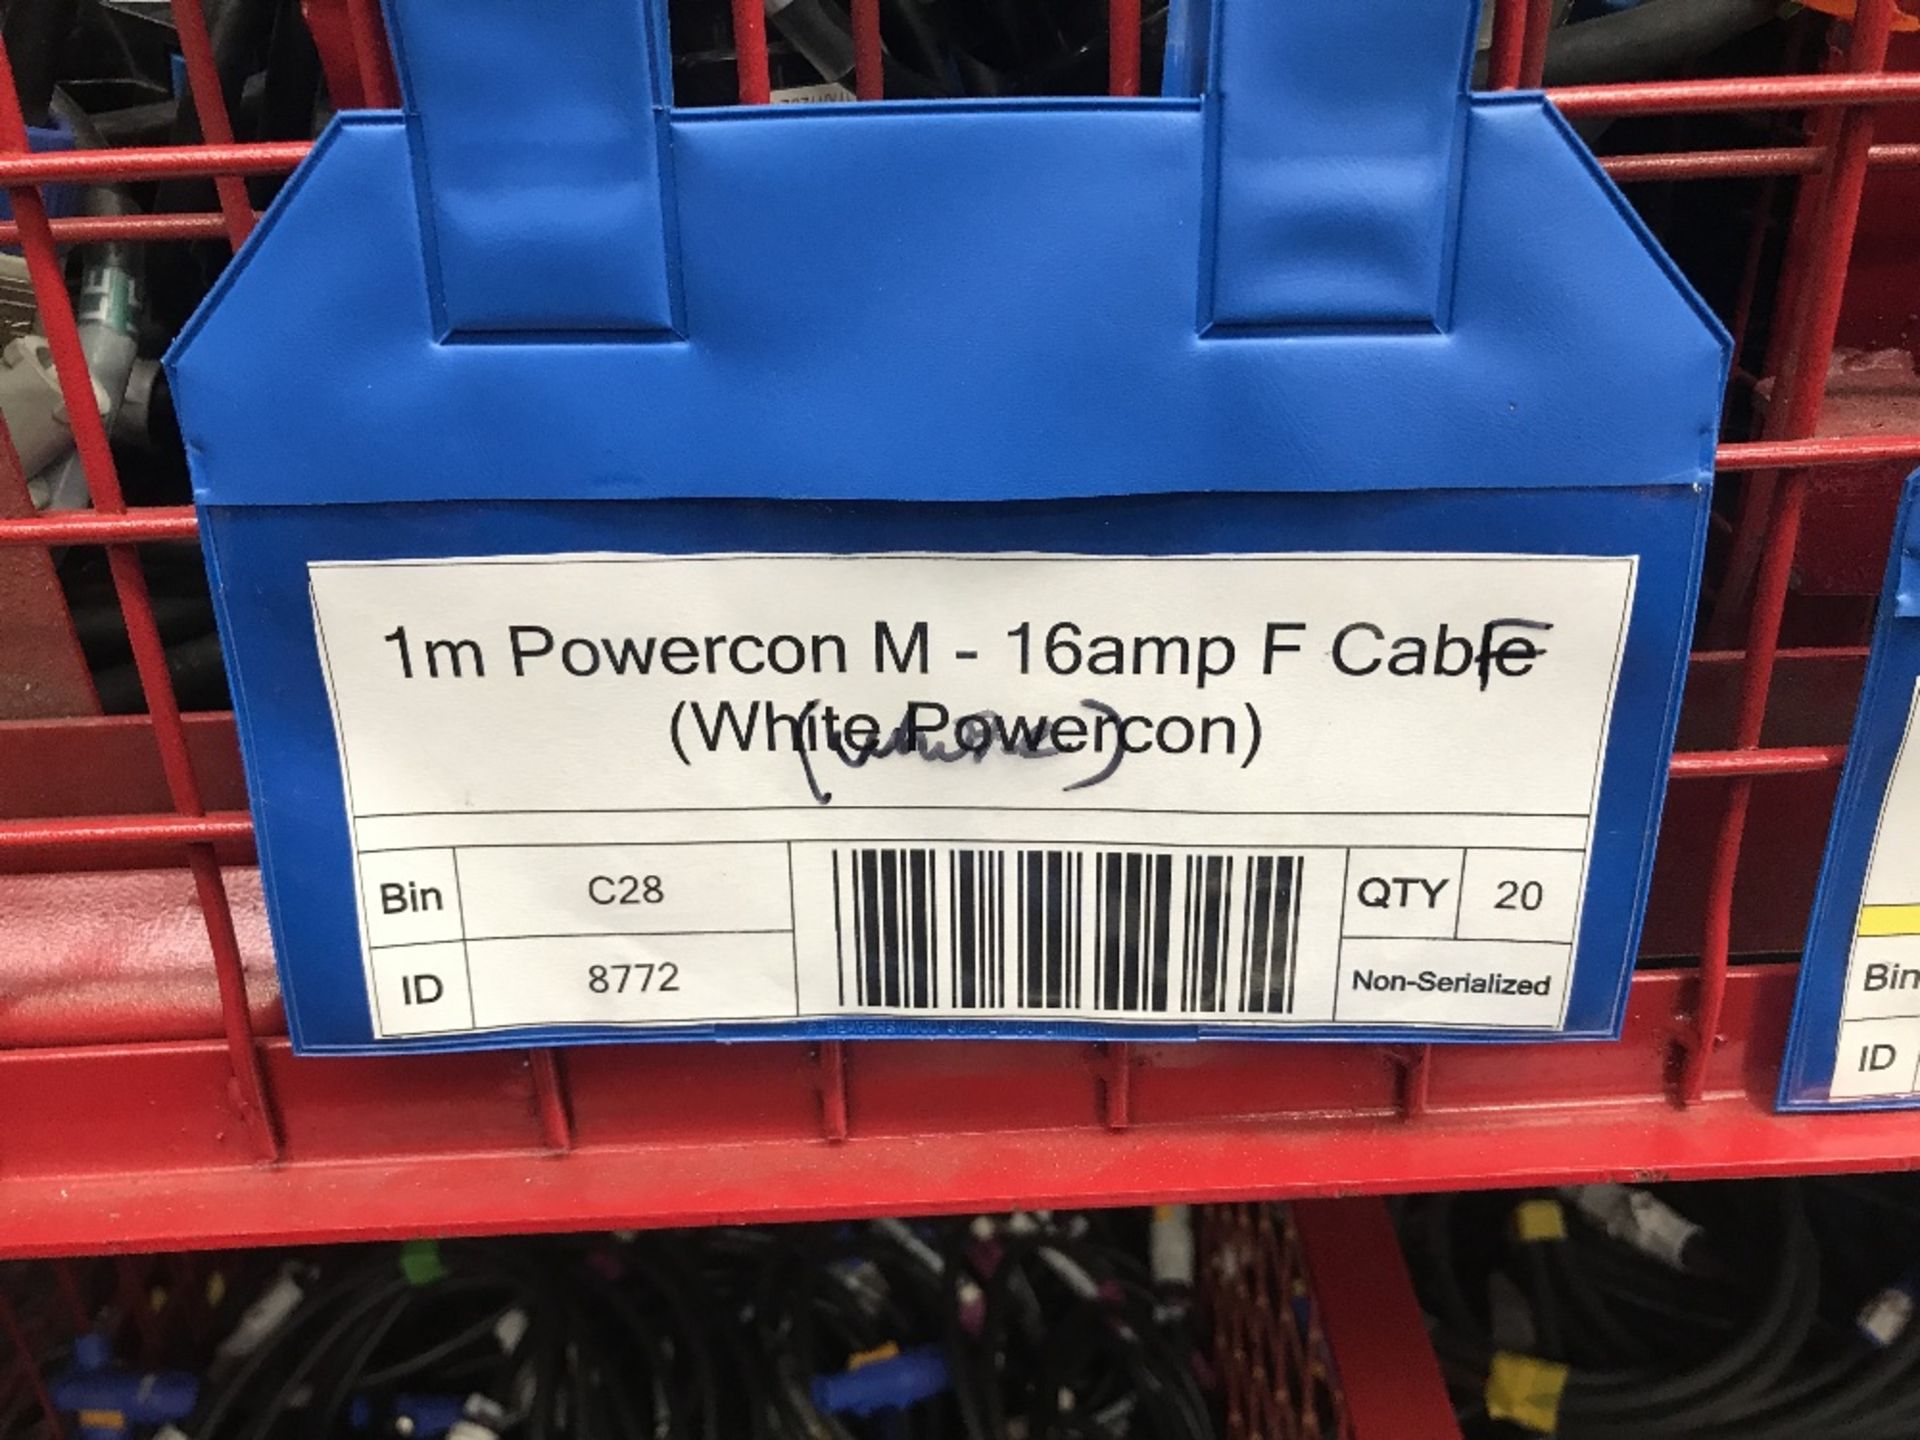 Large Quantity of 1m 16amp M - Powercon F Cable & 3m 13amp M - Powercon, 10m 13amp M - Powercon F - Image 2 of 4